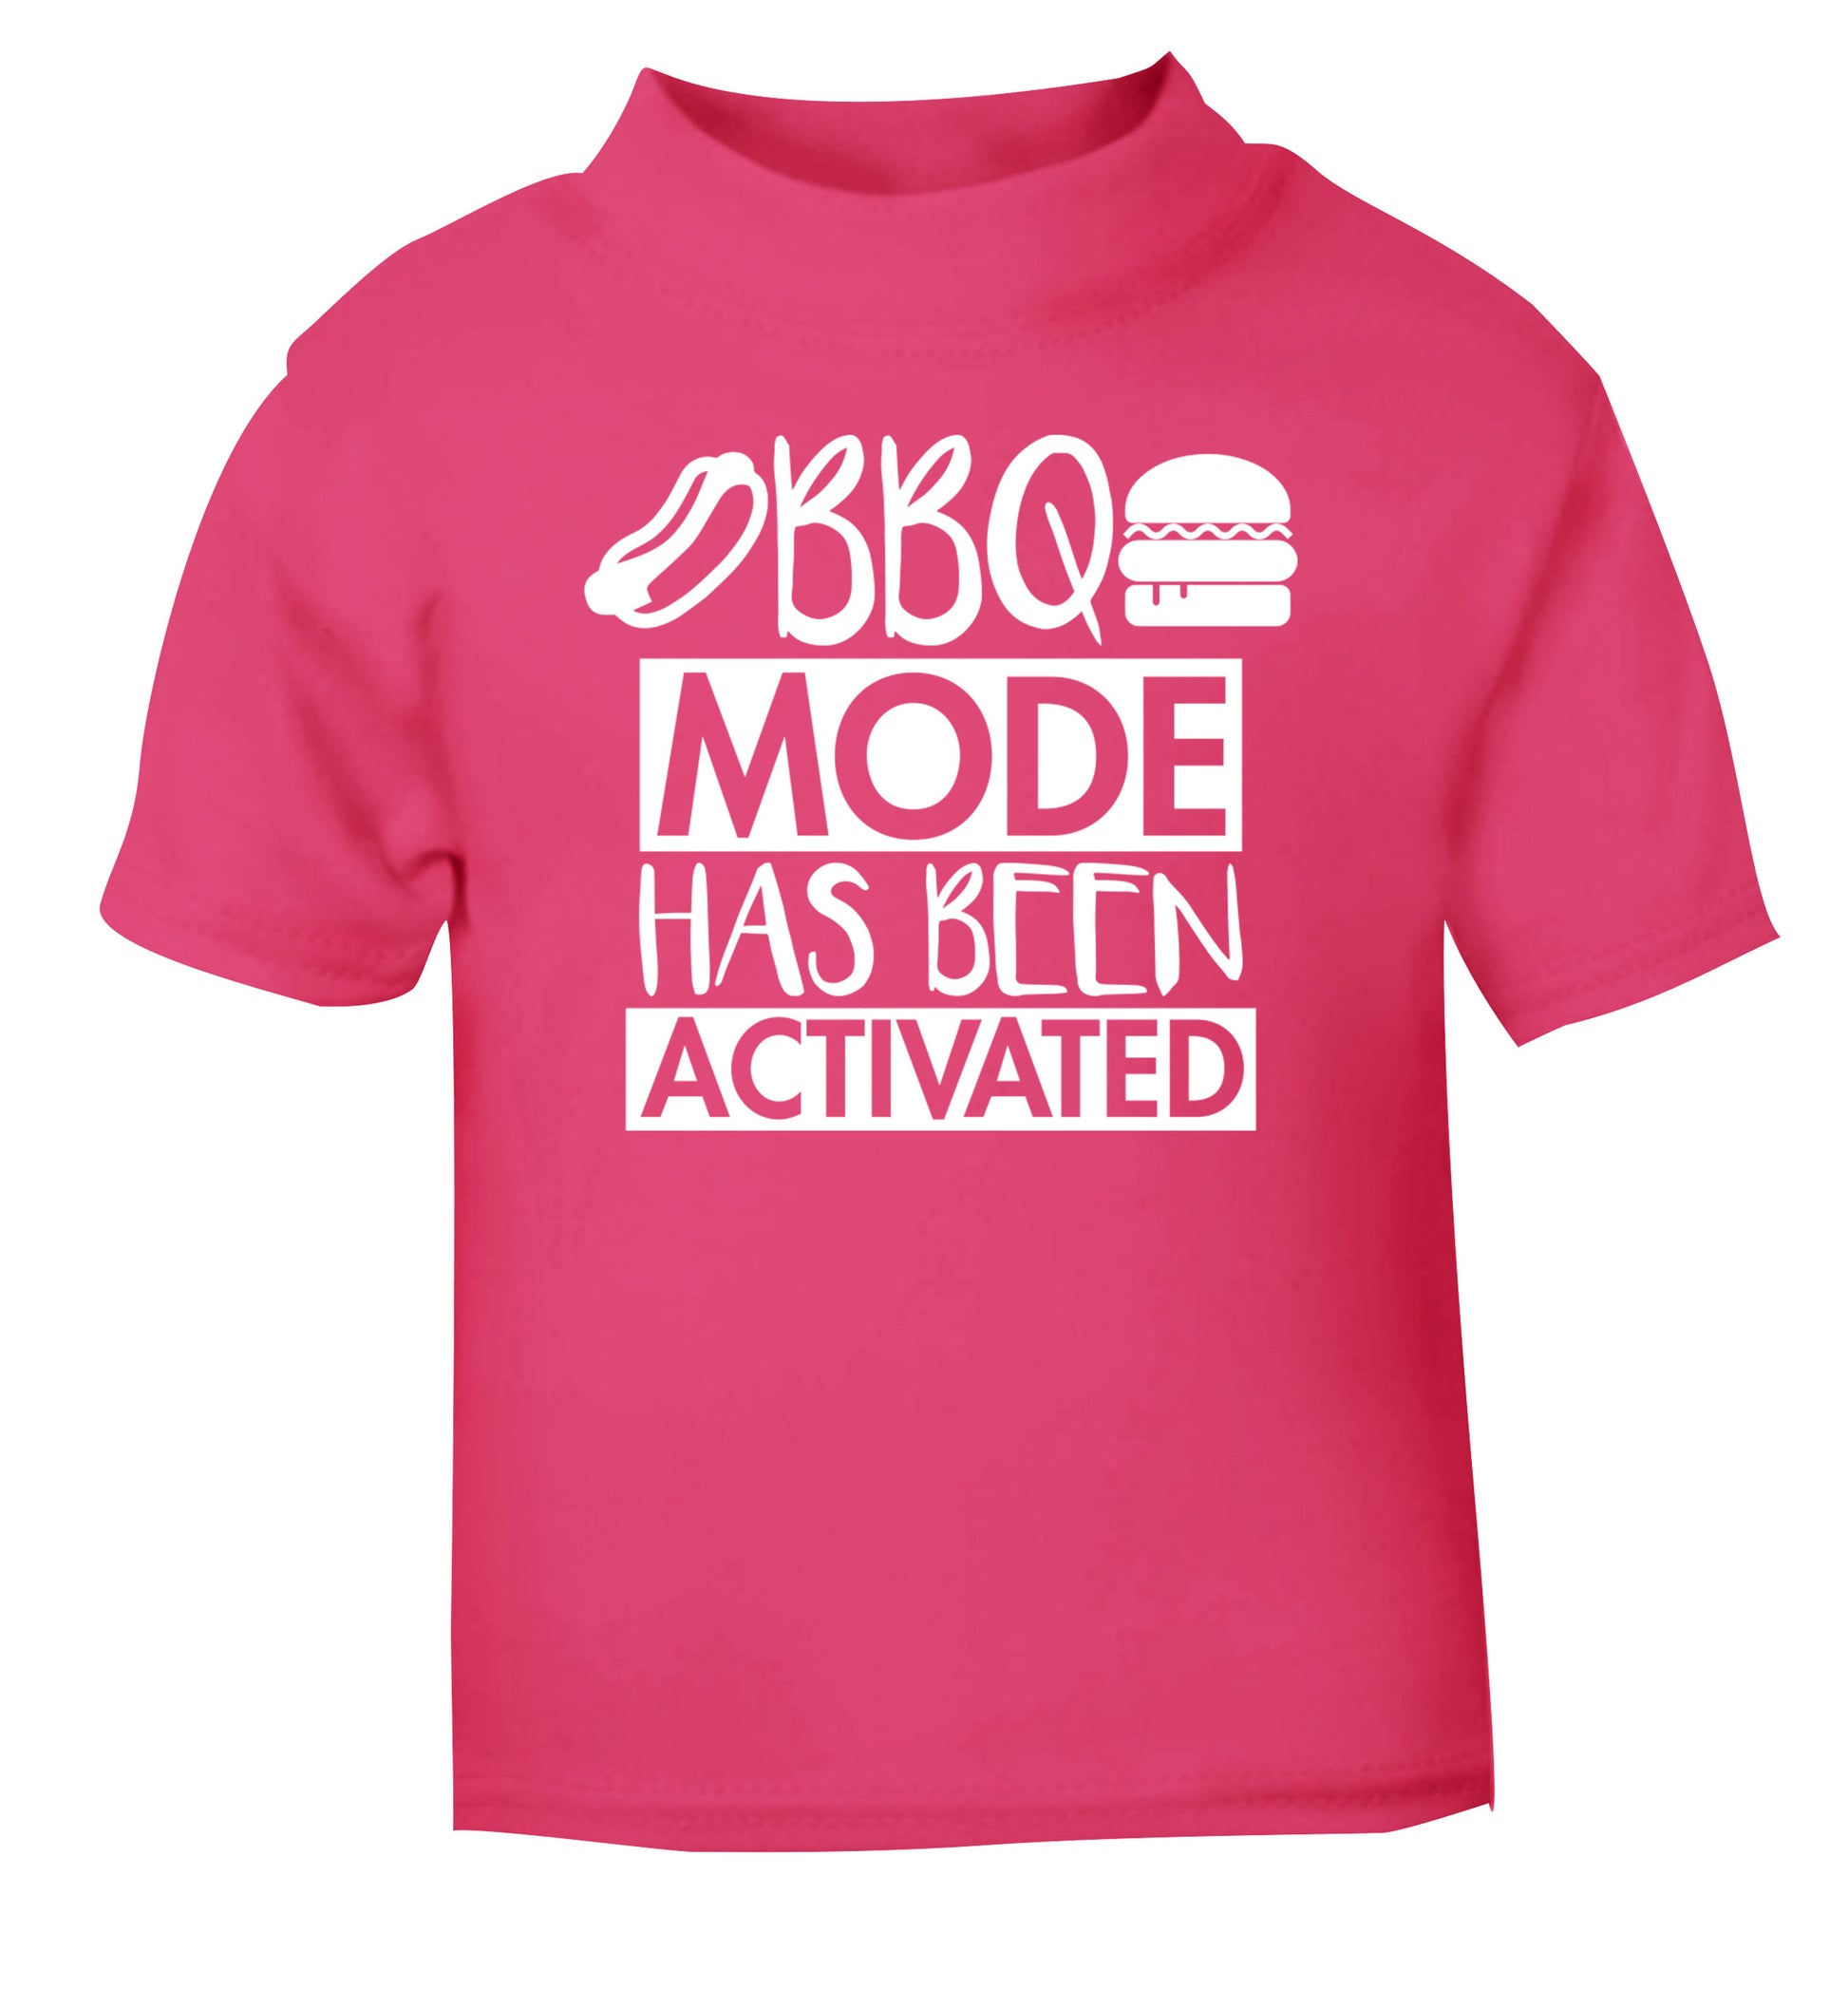 Bbq mode has been activated pink Baby Toddler Tshirt 2 Years